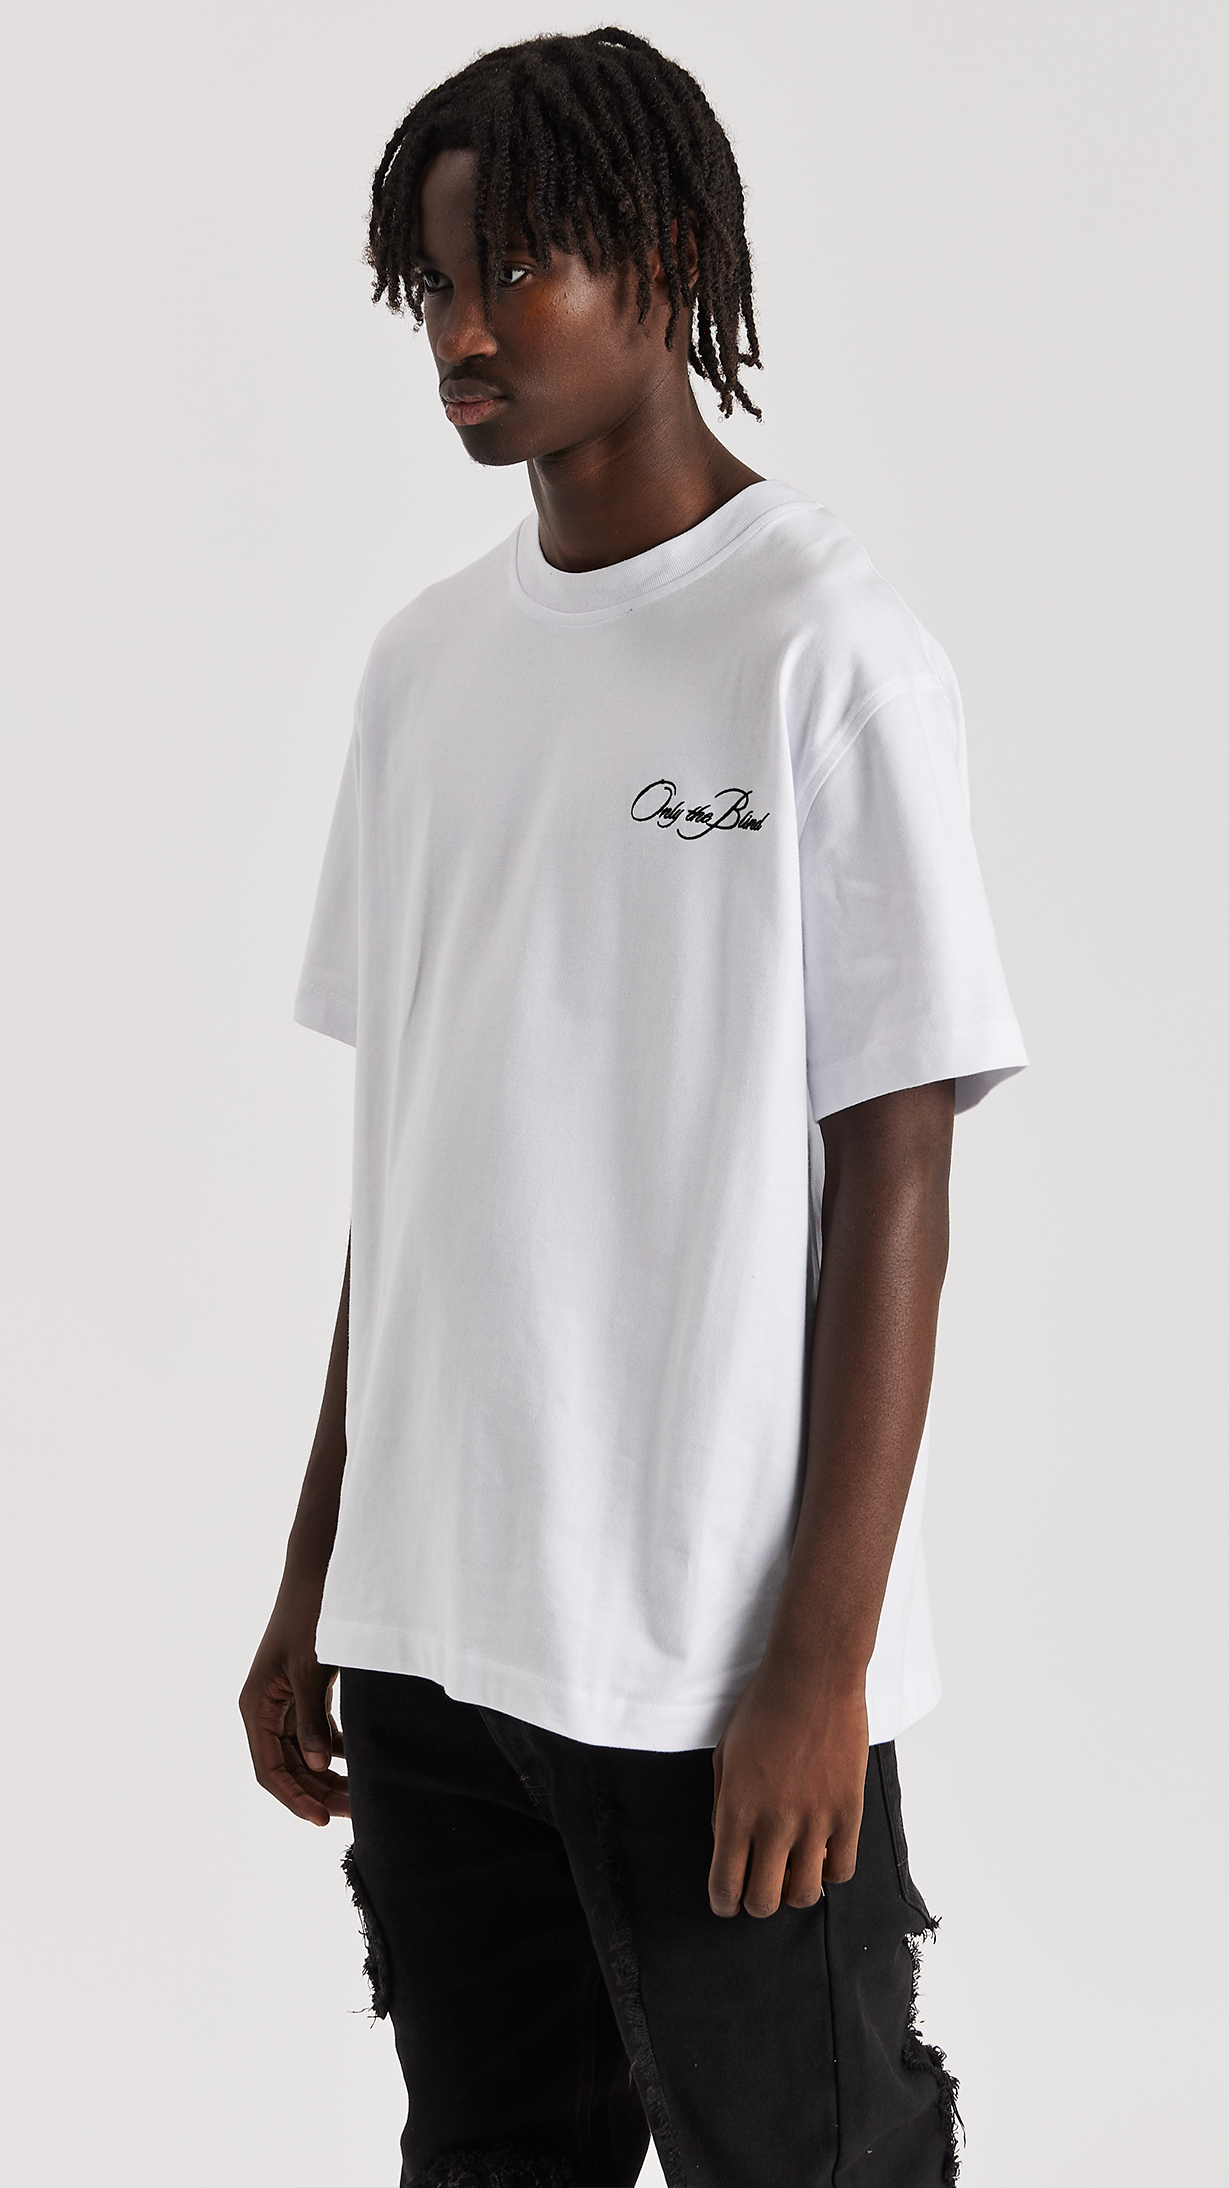 ONLY THE BLIND - Frozen White Essential T-Shirt